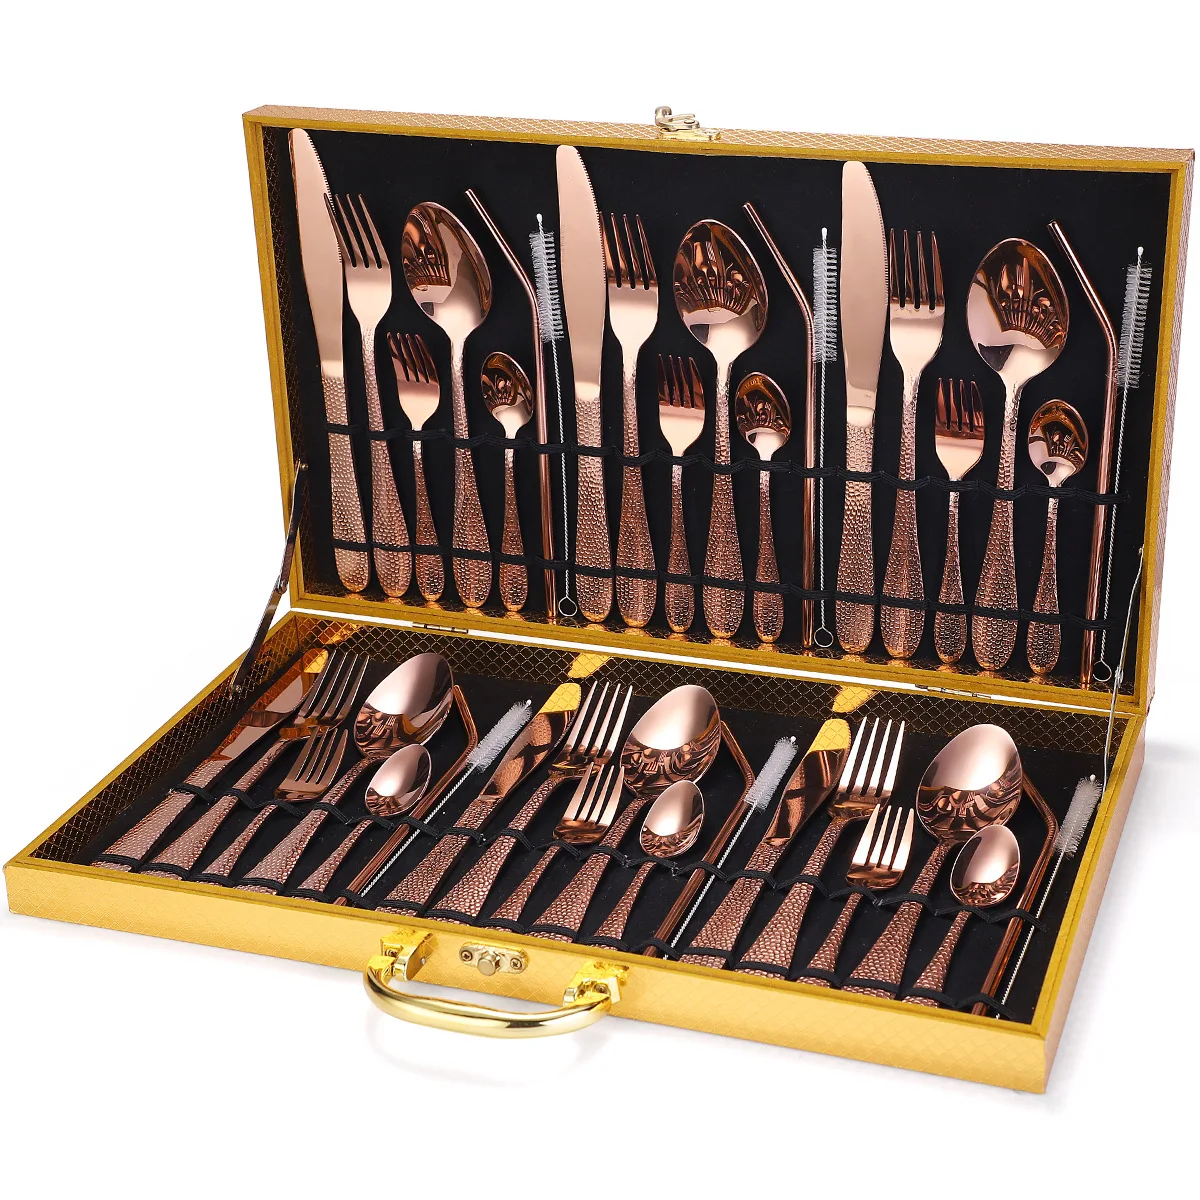 Luxury Golden 42-piece Cutlery Set Stainless Steel Fork Spoon Knife Straw Eco Friendly Cutlery Kitchen Accessories Wood Gift Box